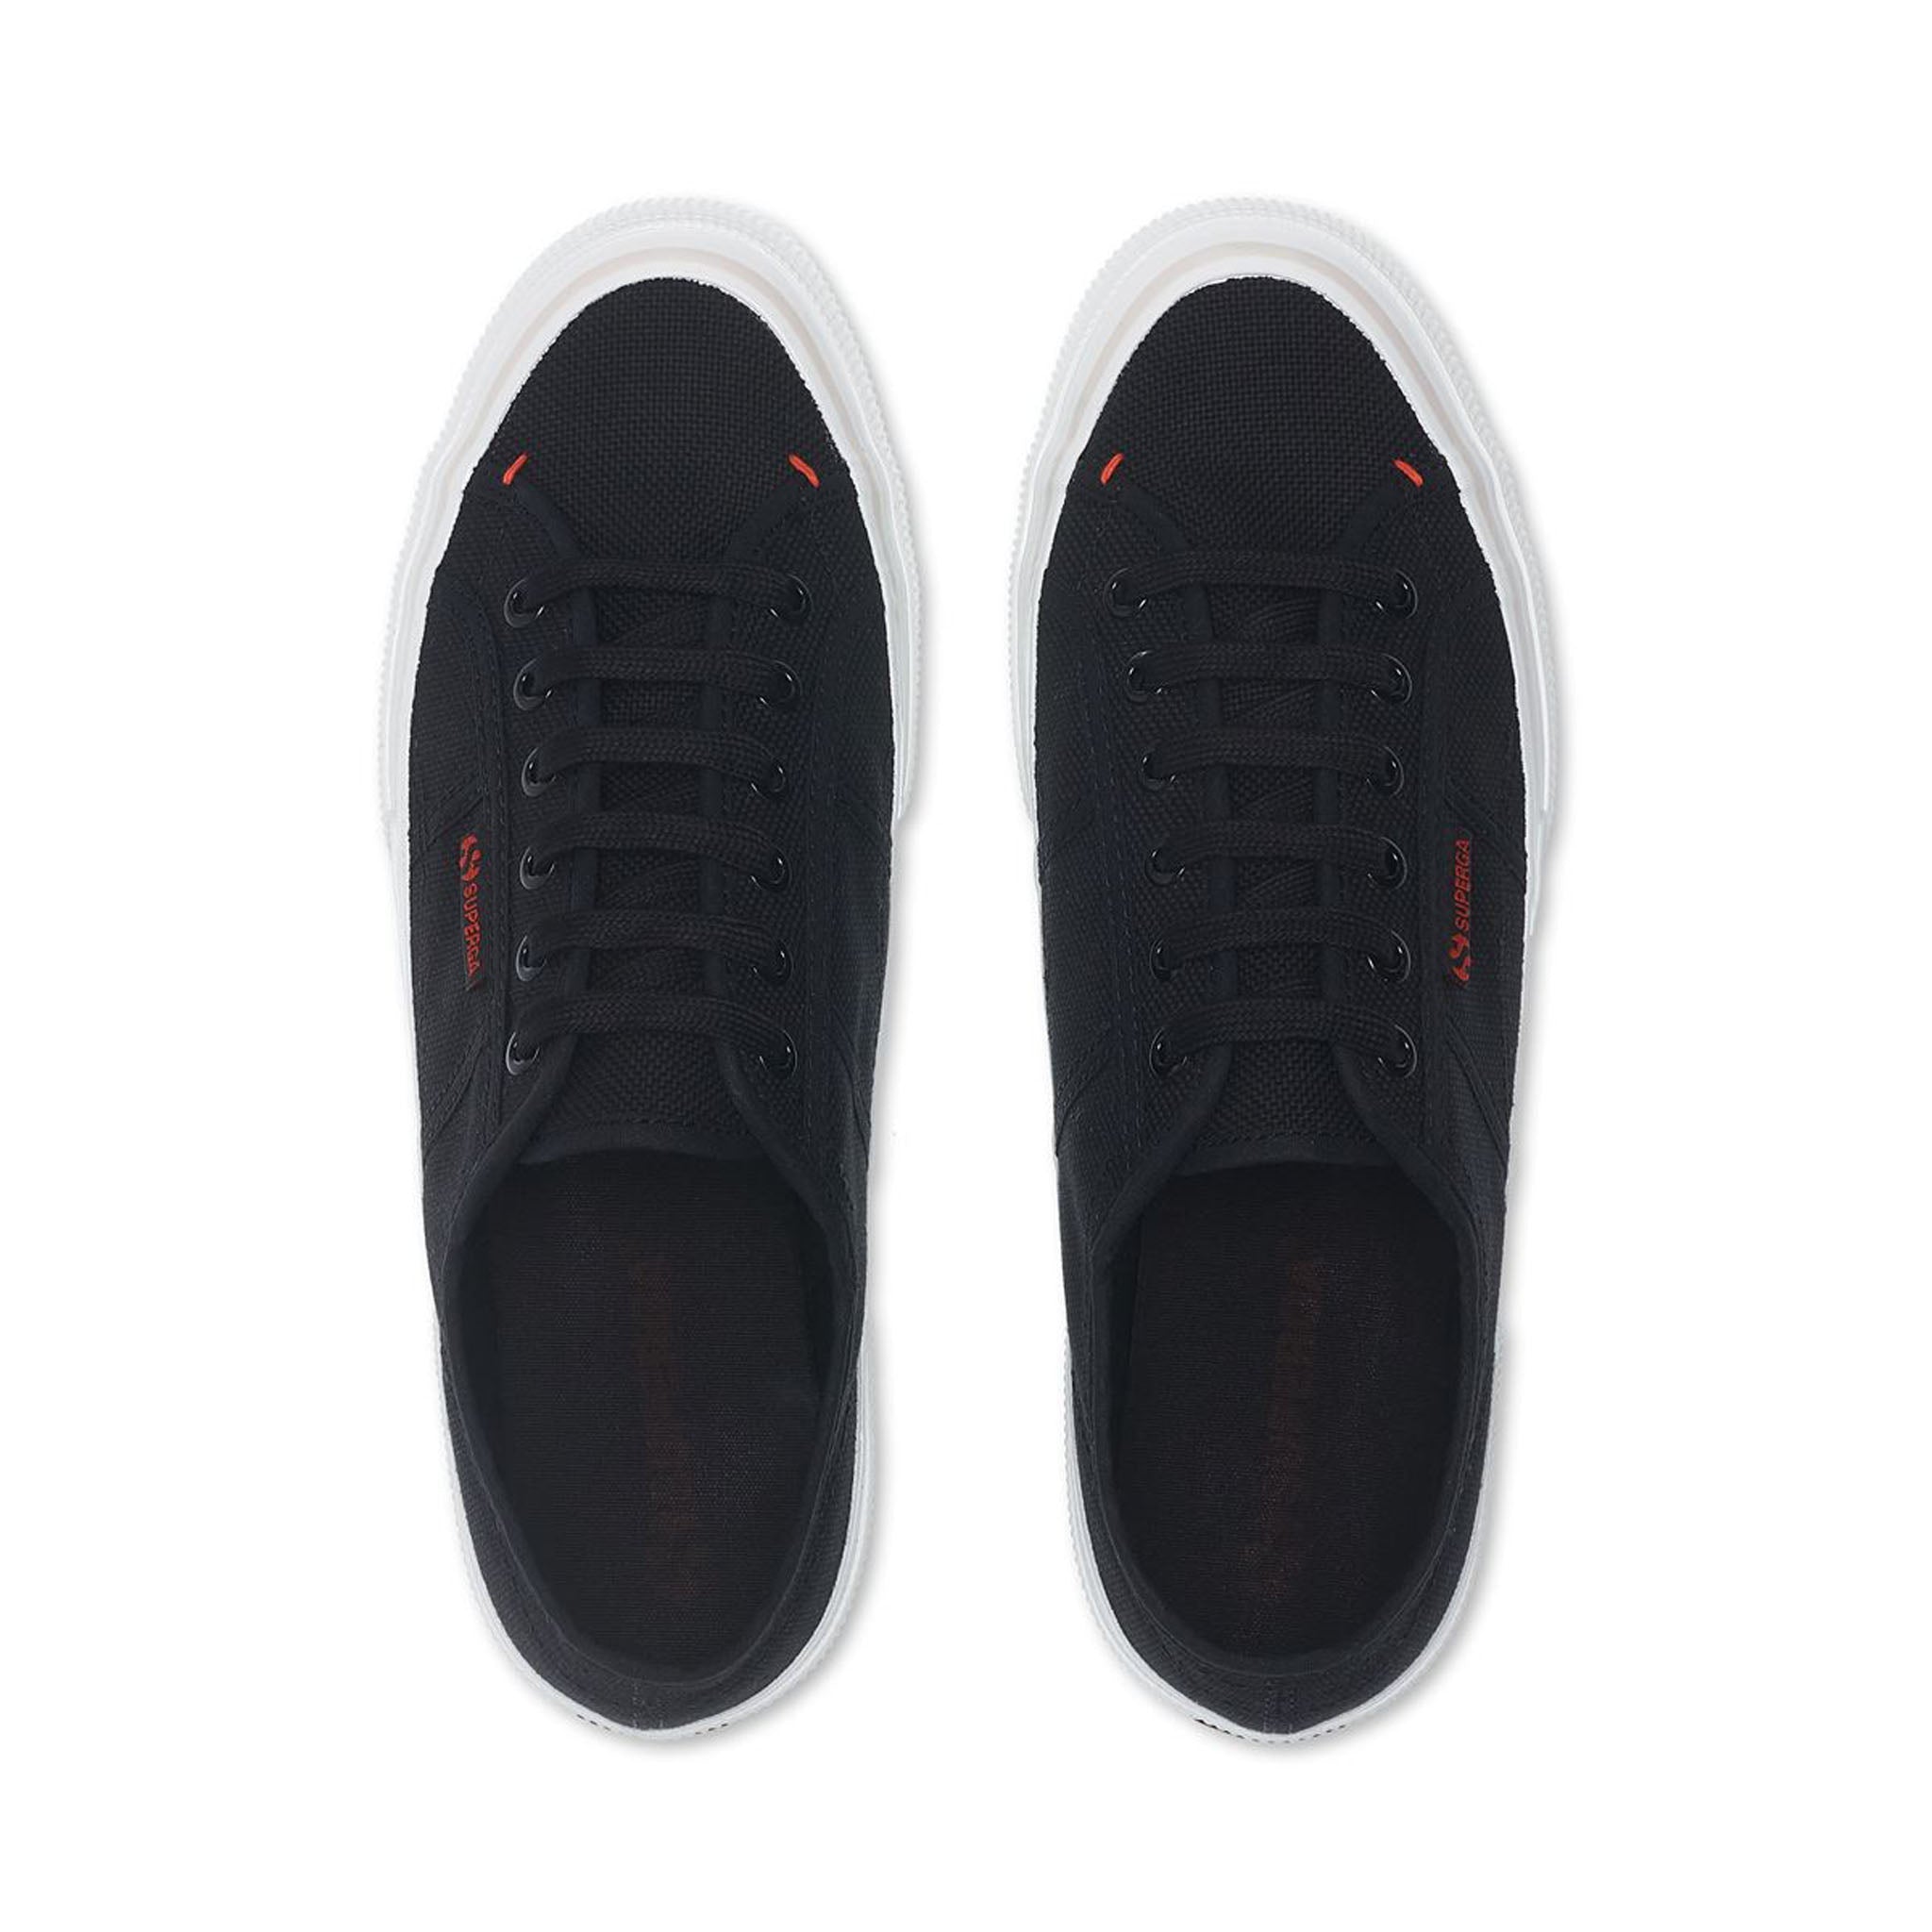 Superga 2490 Bold Sneakers - Black Red. Top view.